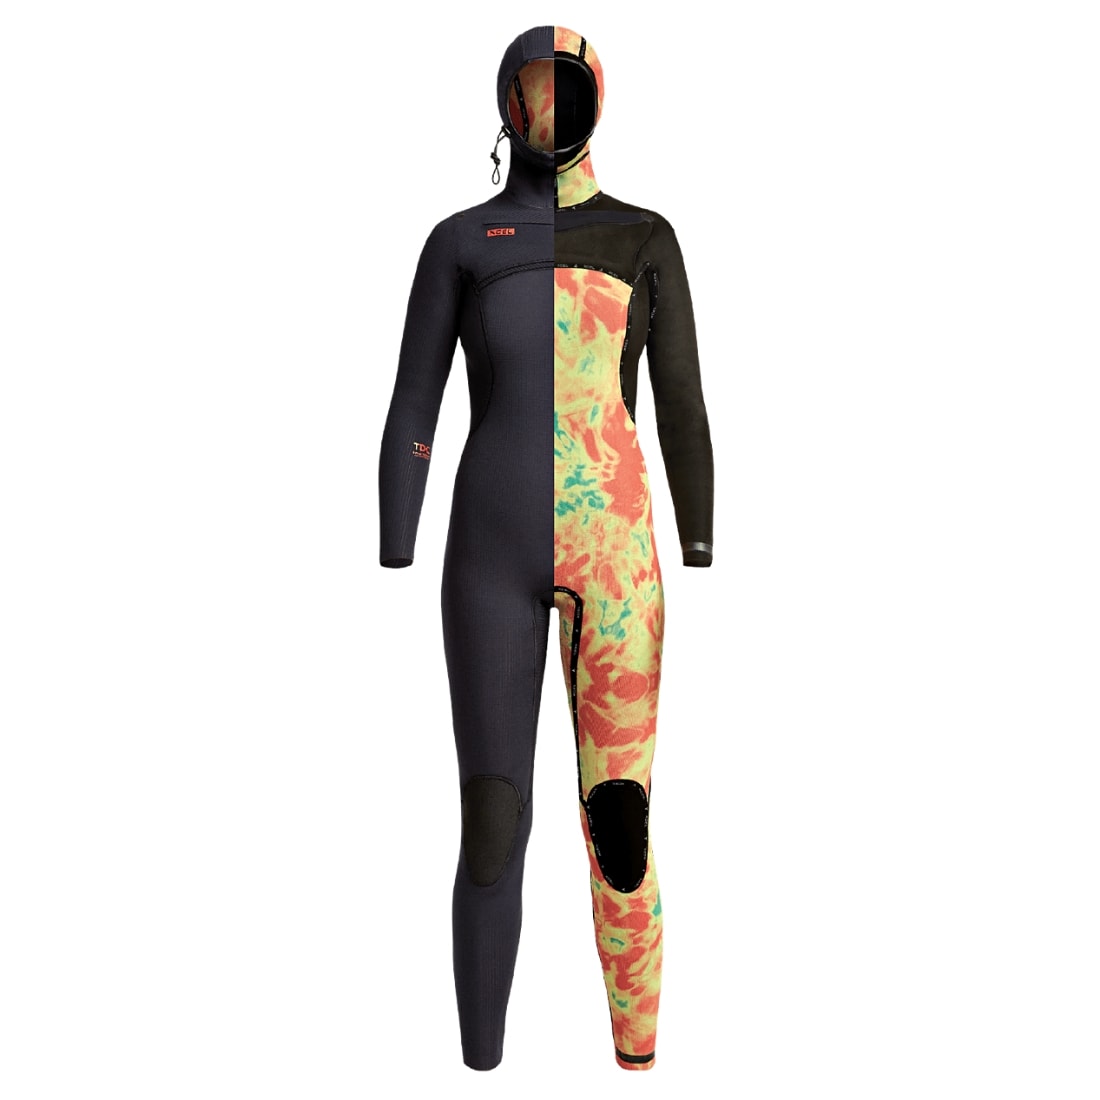 Xcel Womens Comp X 5.5/4.5mm Hooded Wetsuit 2022/23 - Black - Womens Full Length Wetsuit by Xcel